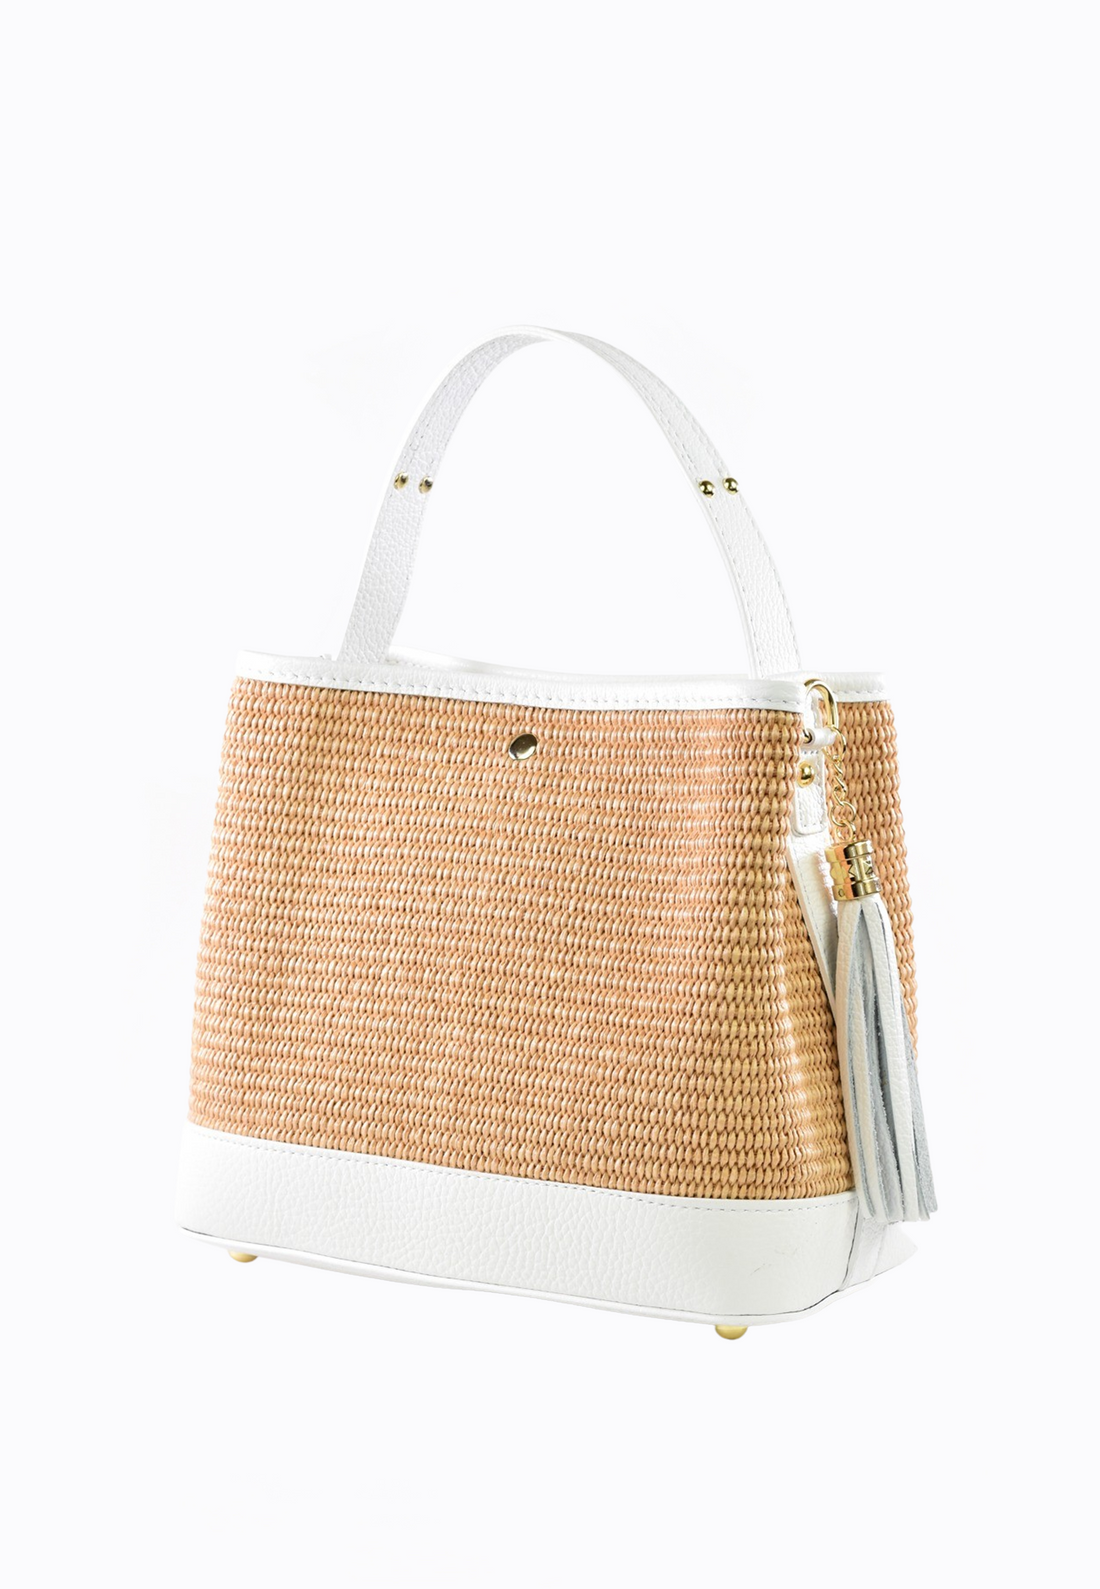 Kendy bag in White Dollar leather